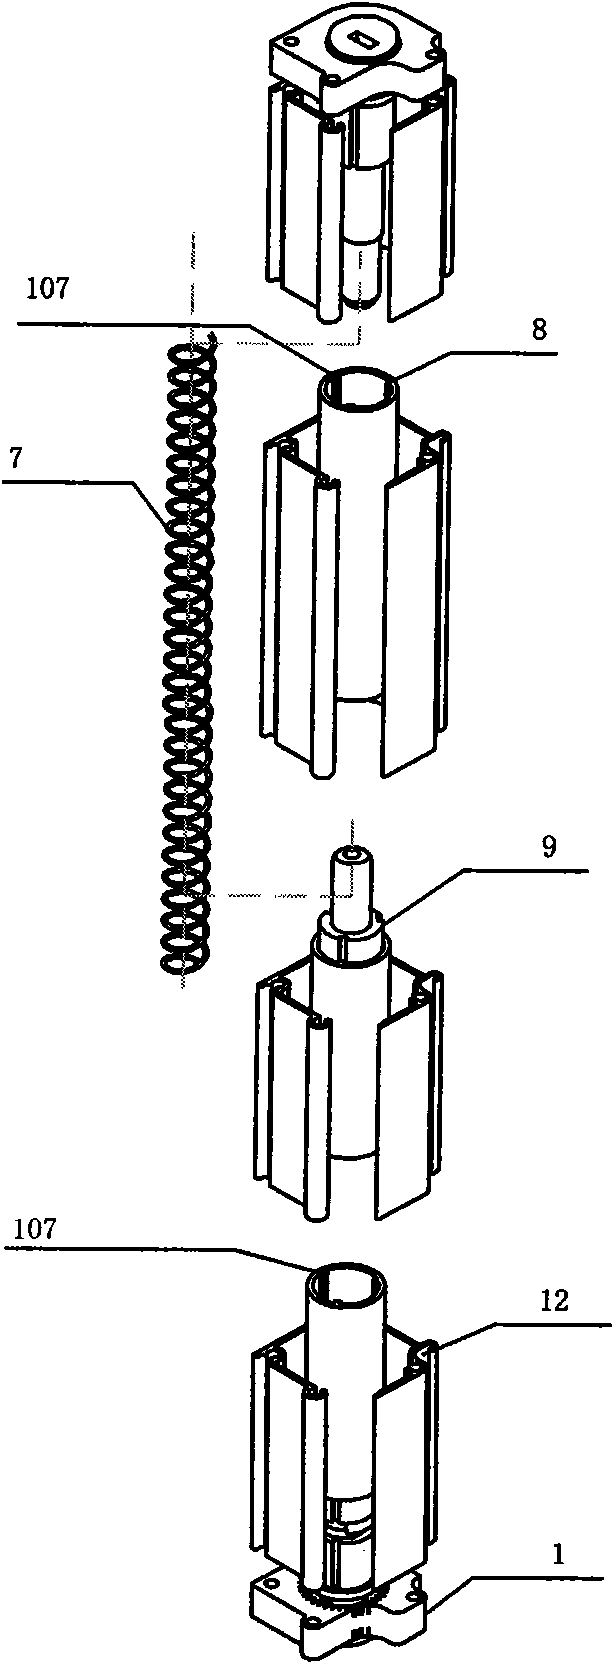 Invisible screen window structure with screw limiting invisible gauze reel structure